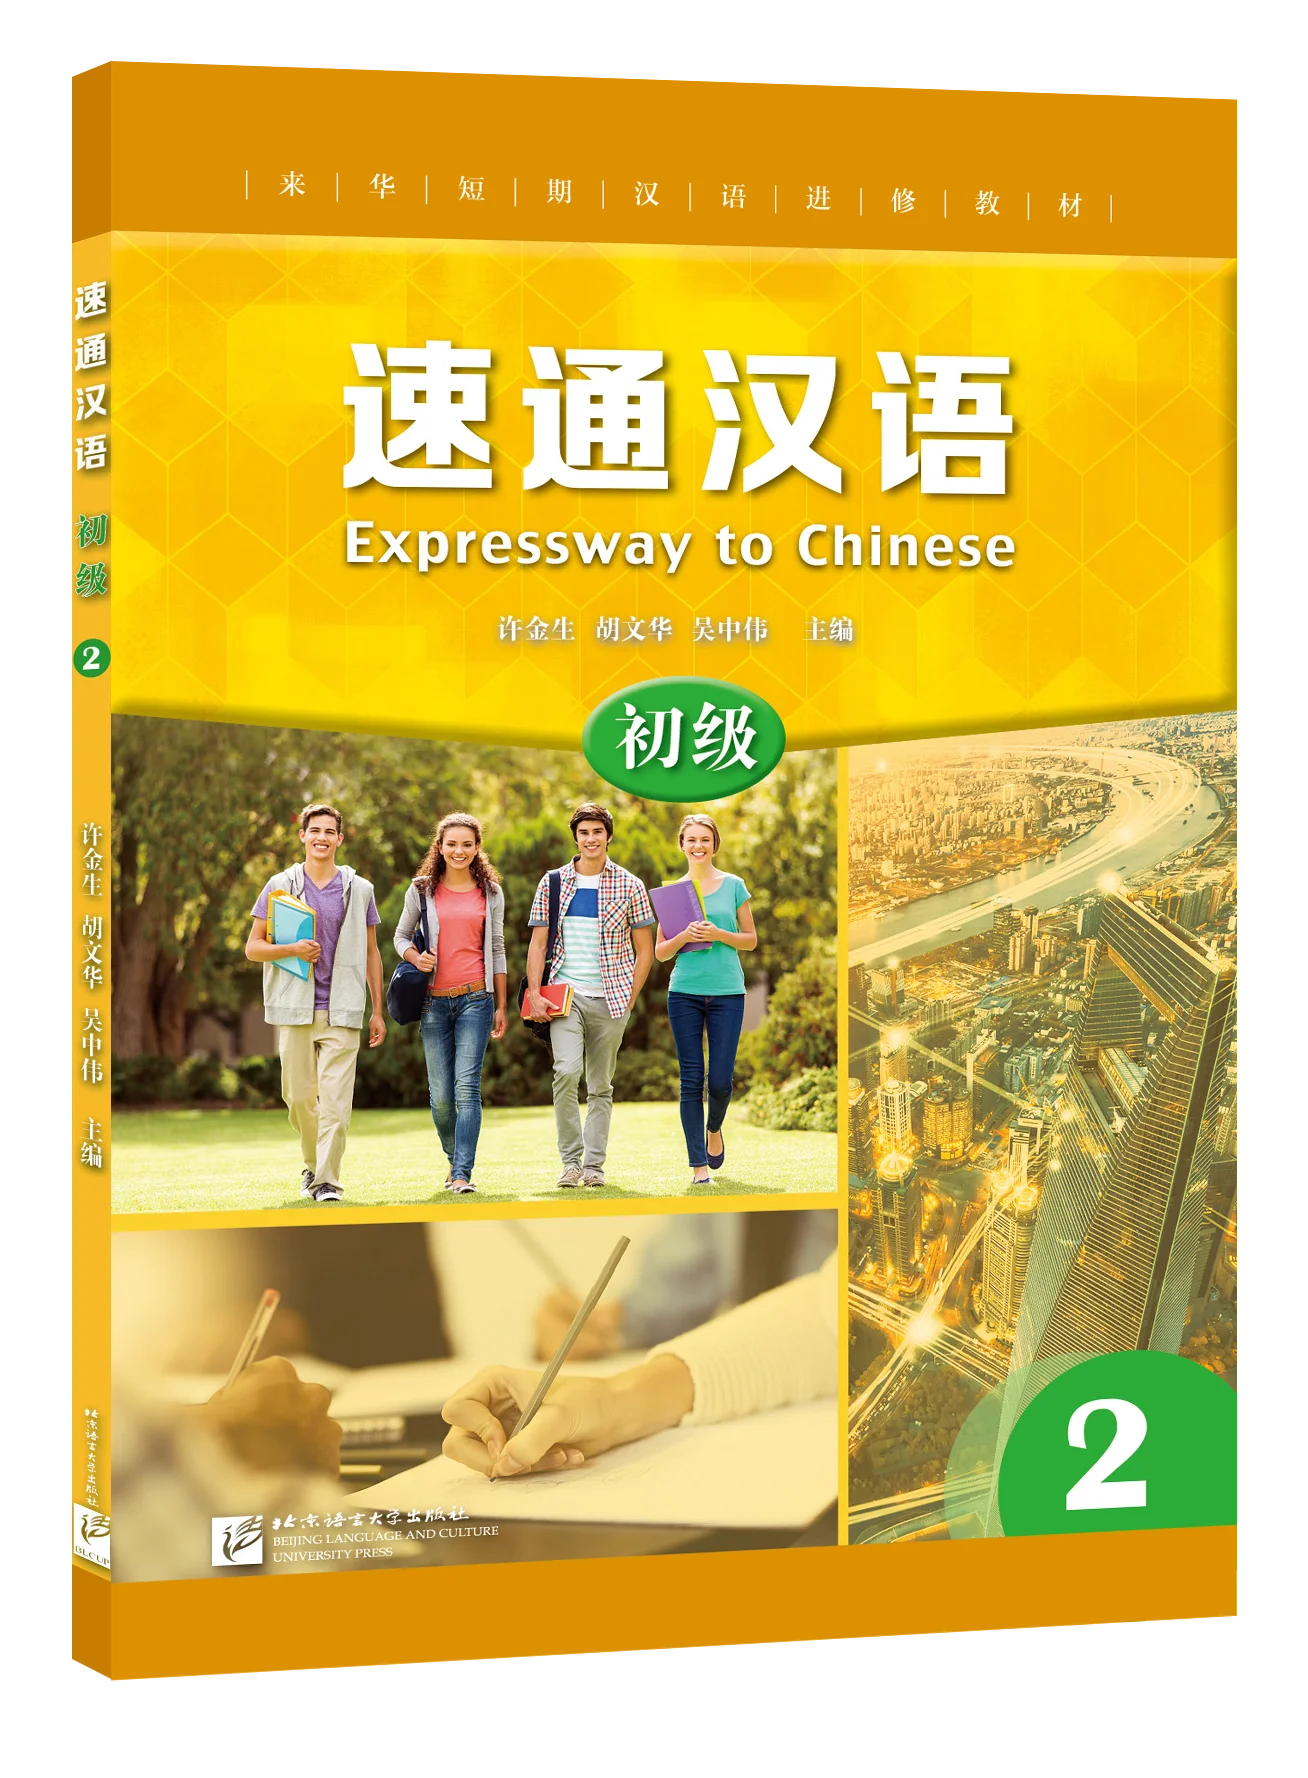 

Learn Chinese HSK EXPRESSWAY TO CHINESE Elementary 1/2/3/4, Intermediate 1/2/3 ,Language English and Chinese